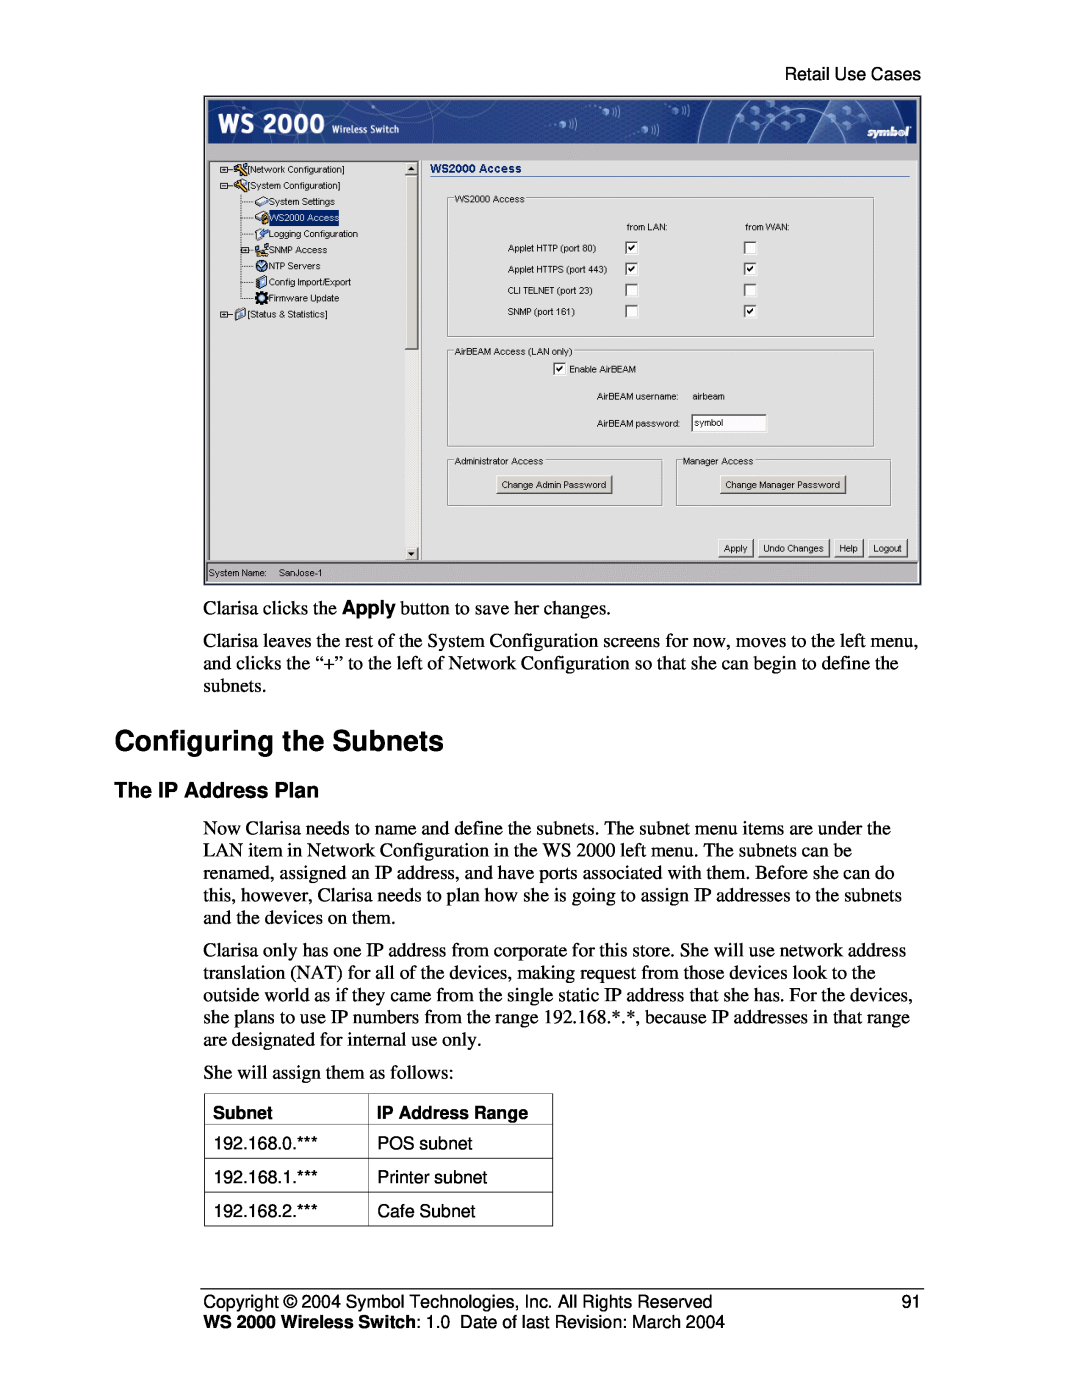 Symbol Technologies WS 2000 manual Configuring the Subnets, The IP Address Plan 